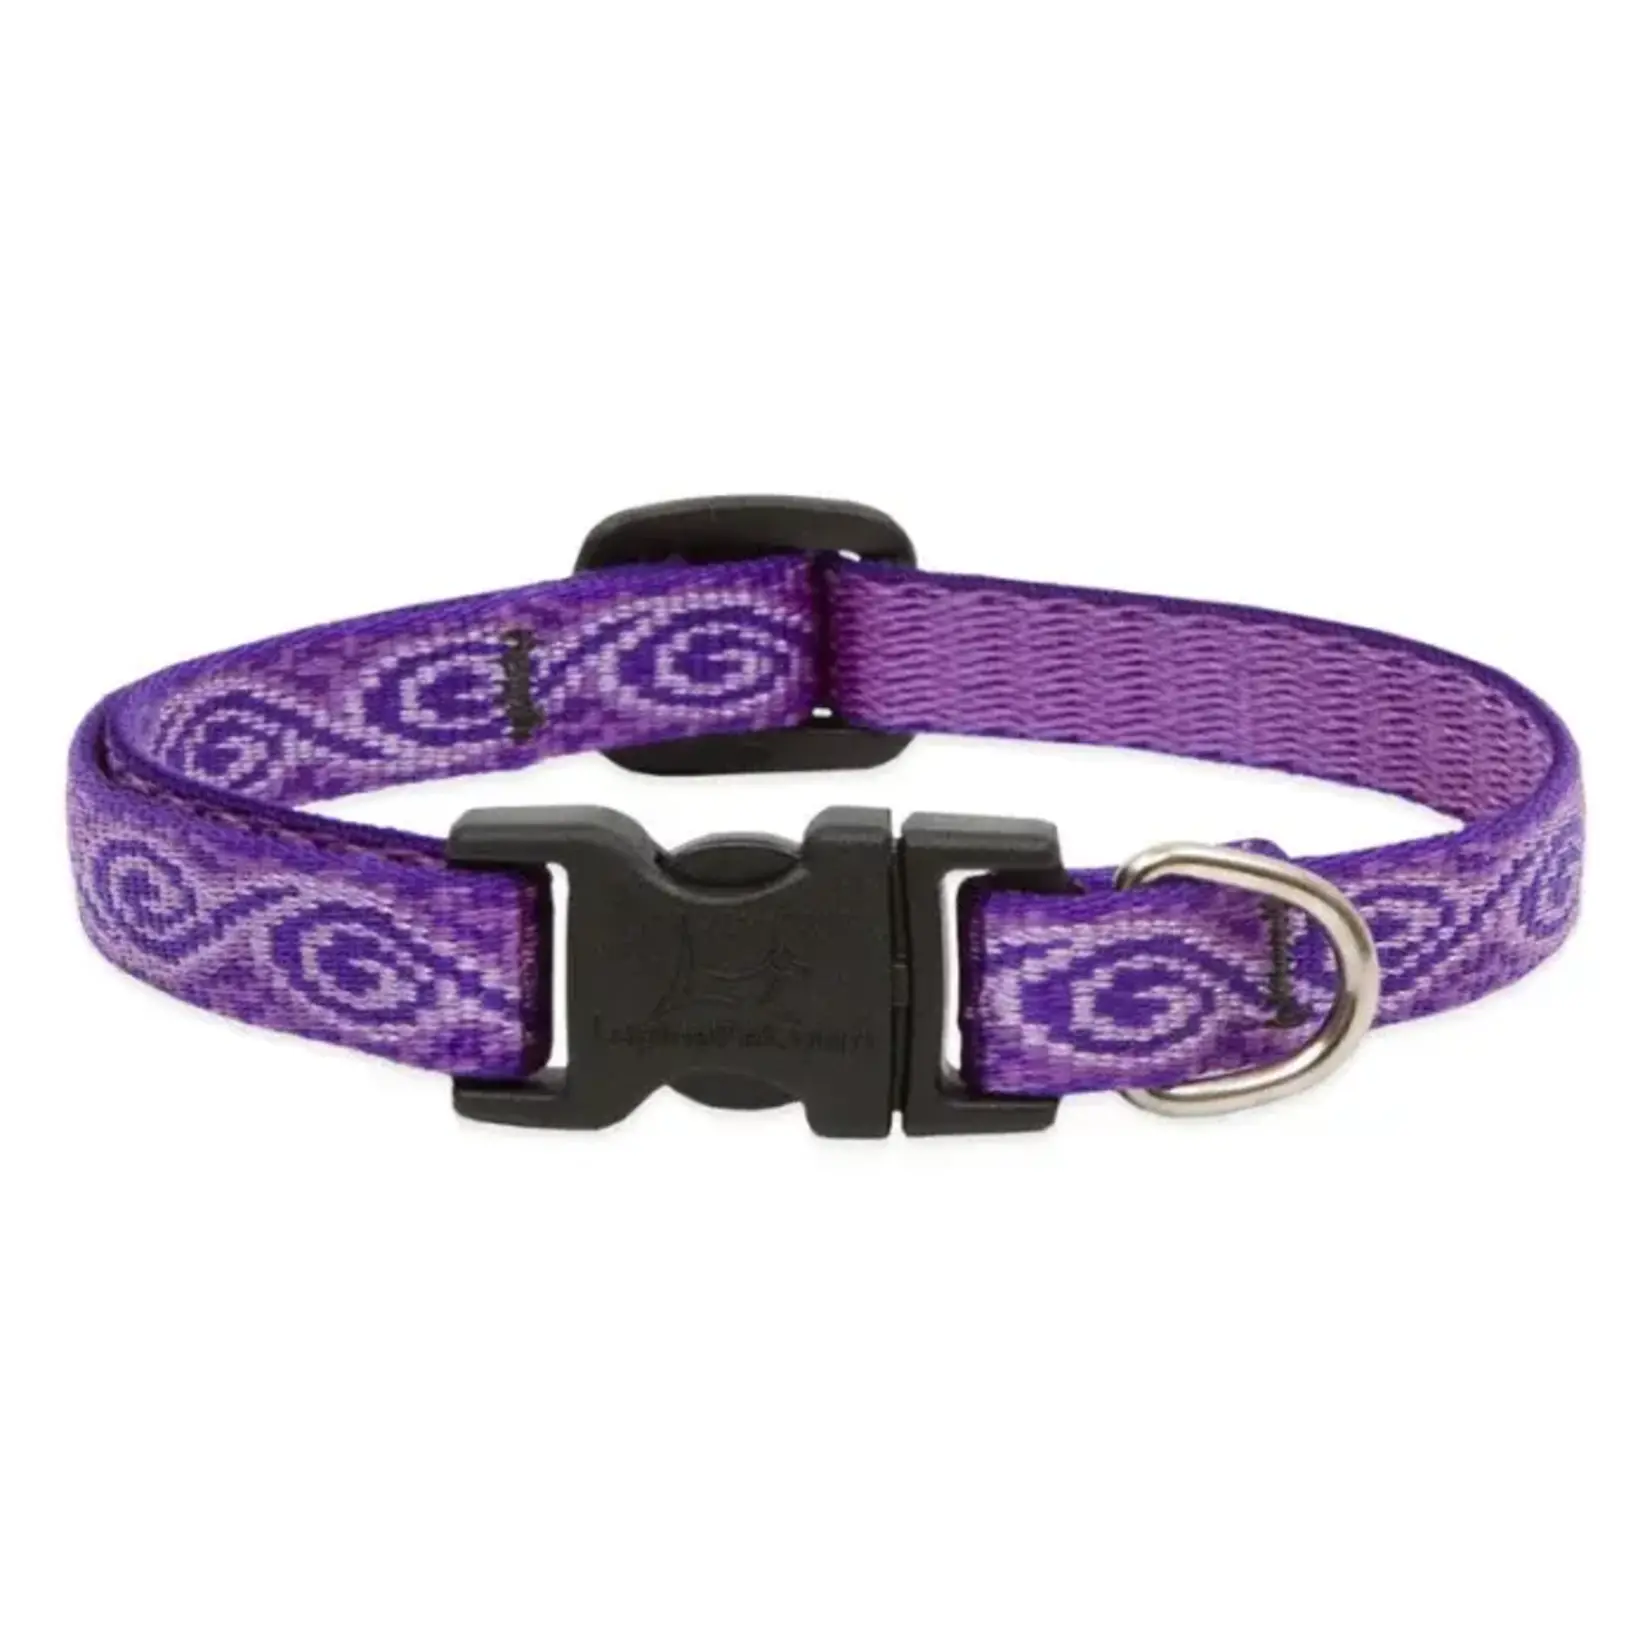 Lupine Lupine Jelly Roll 1/2 in x 8-12 in Adjustable Collar